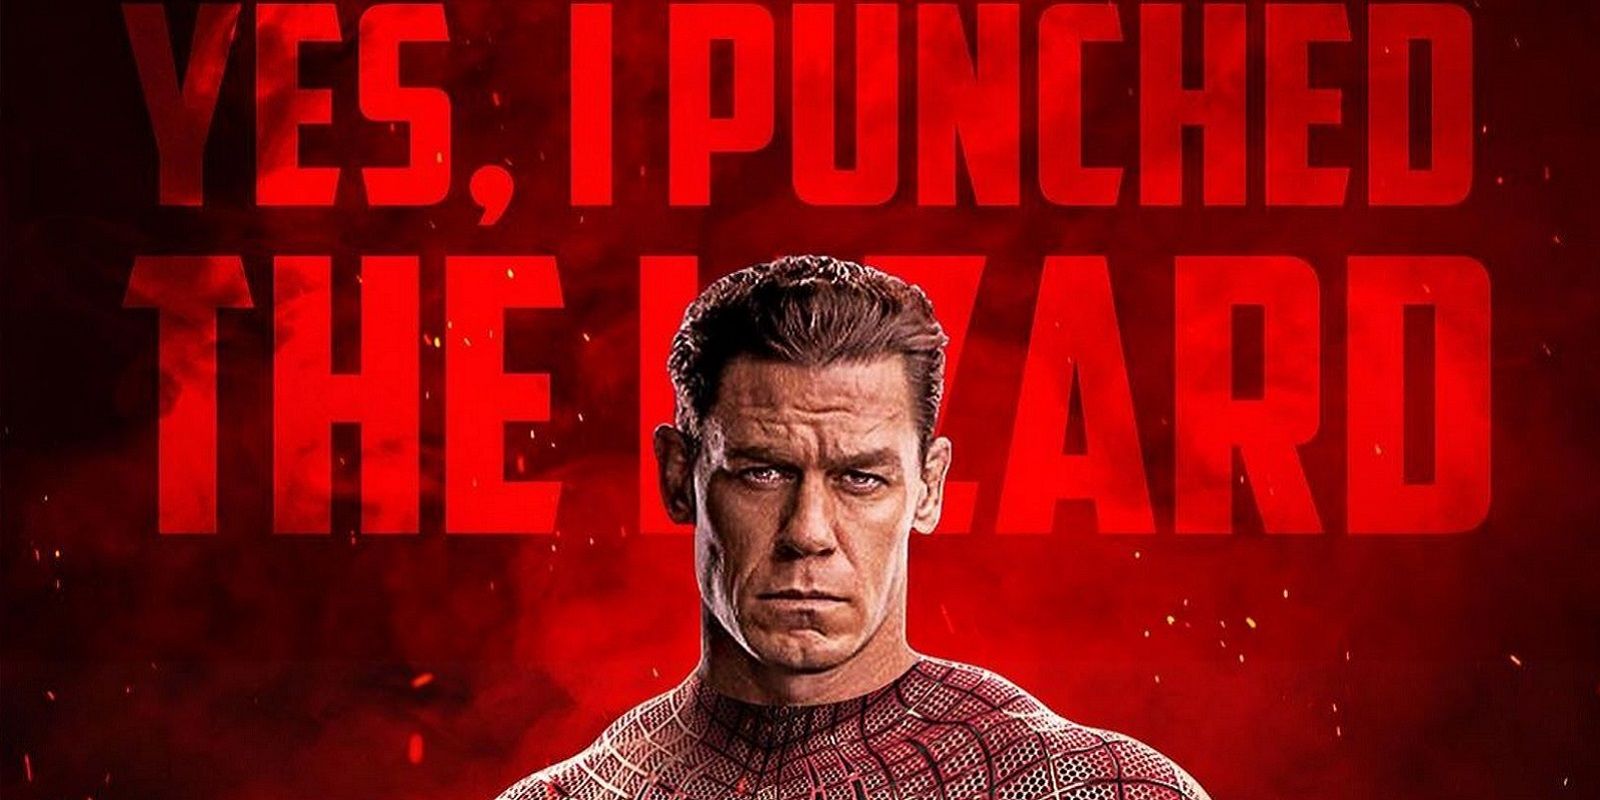 John Cena punched The Lizard in the Spider-Man: No Way Home trailer thanks to fan art.